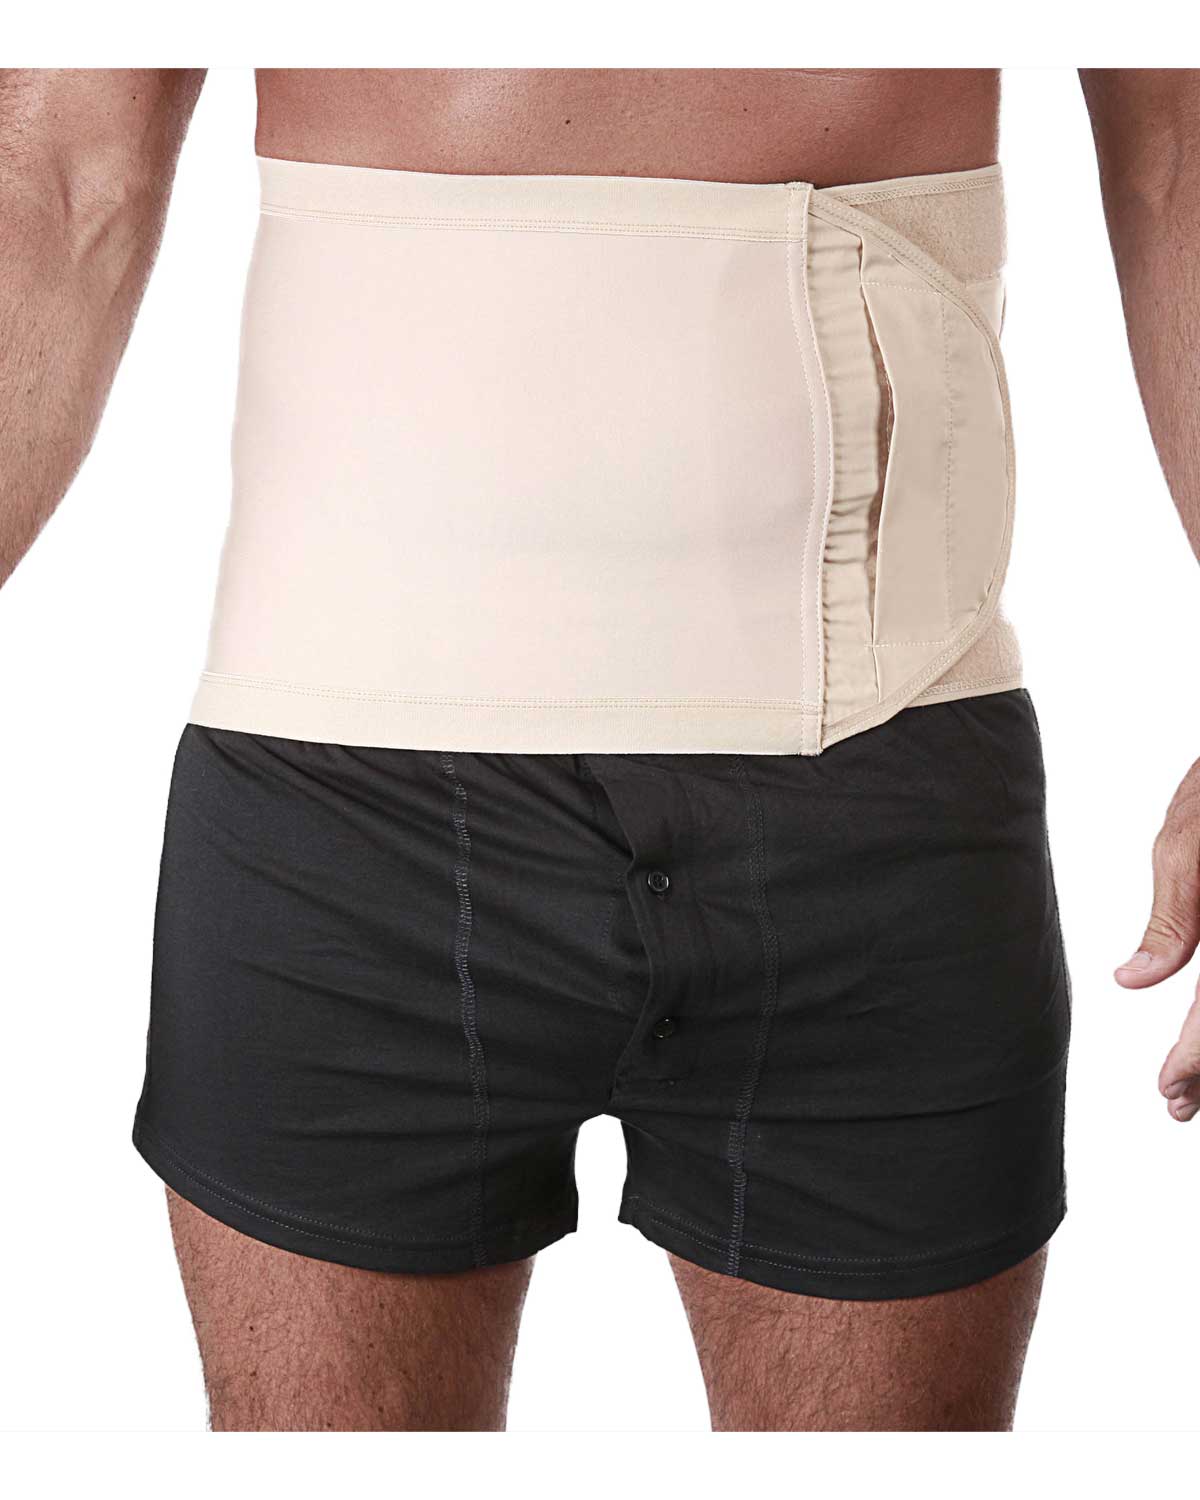 CUI Unisex Anti Roll Wraparound Ostomy Hernia Support Belt - 26cm/10inch - 1 each, 26 CM / 10 INCH, SMALL - WHITE - NO OPENING